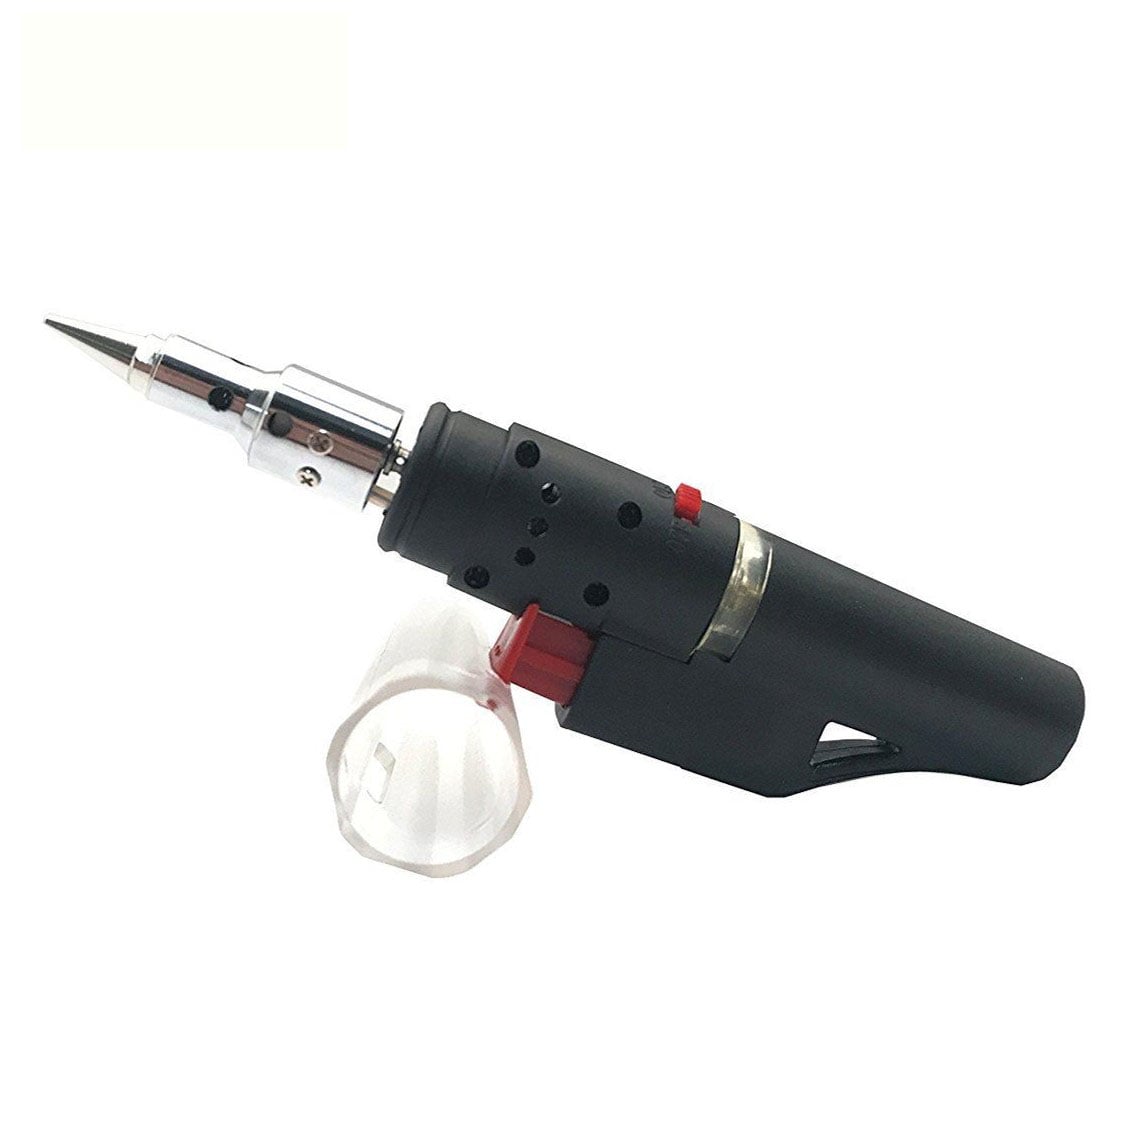 Cordless Soldering Iron A-HOT Soldering Factory PT-170 Blue